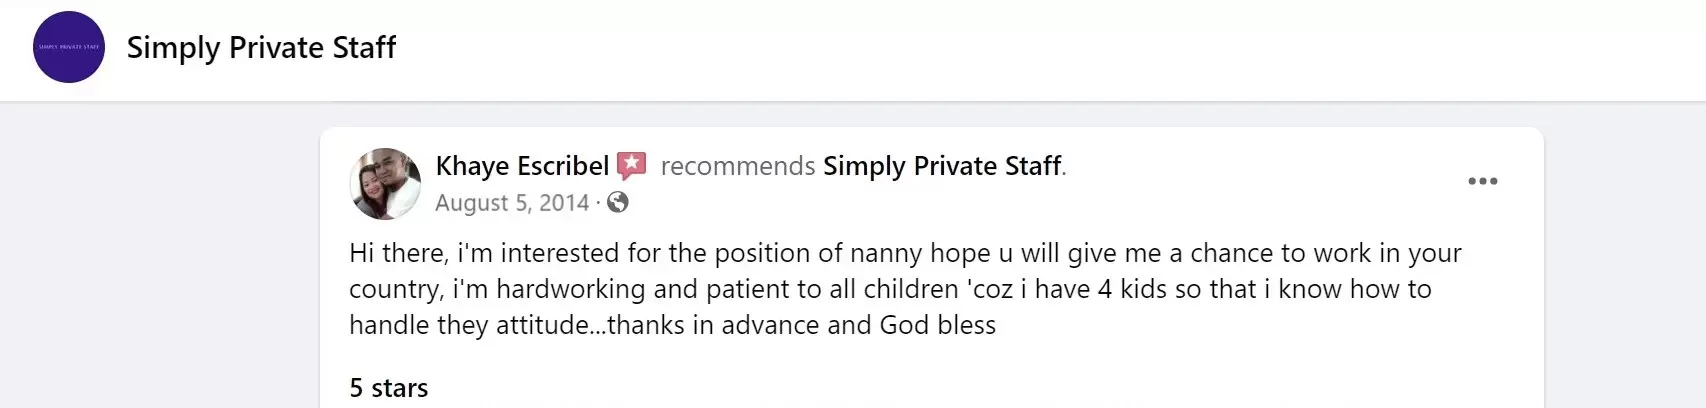 positive review of Simply Private Staff